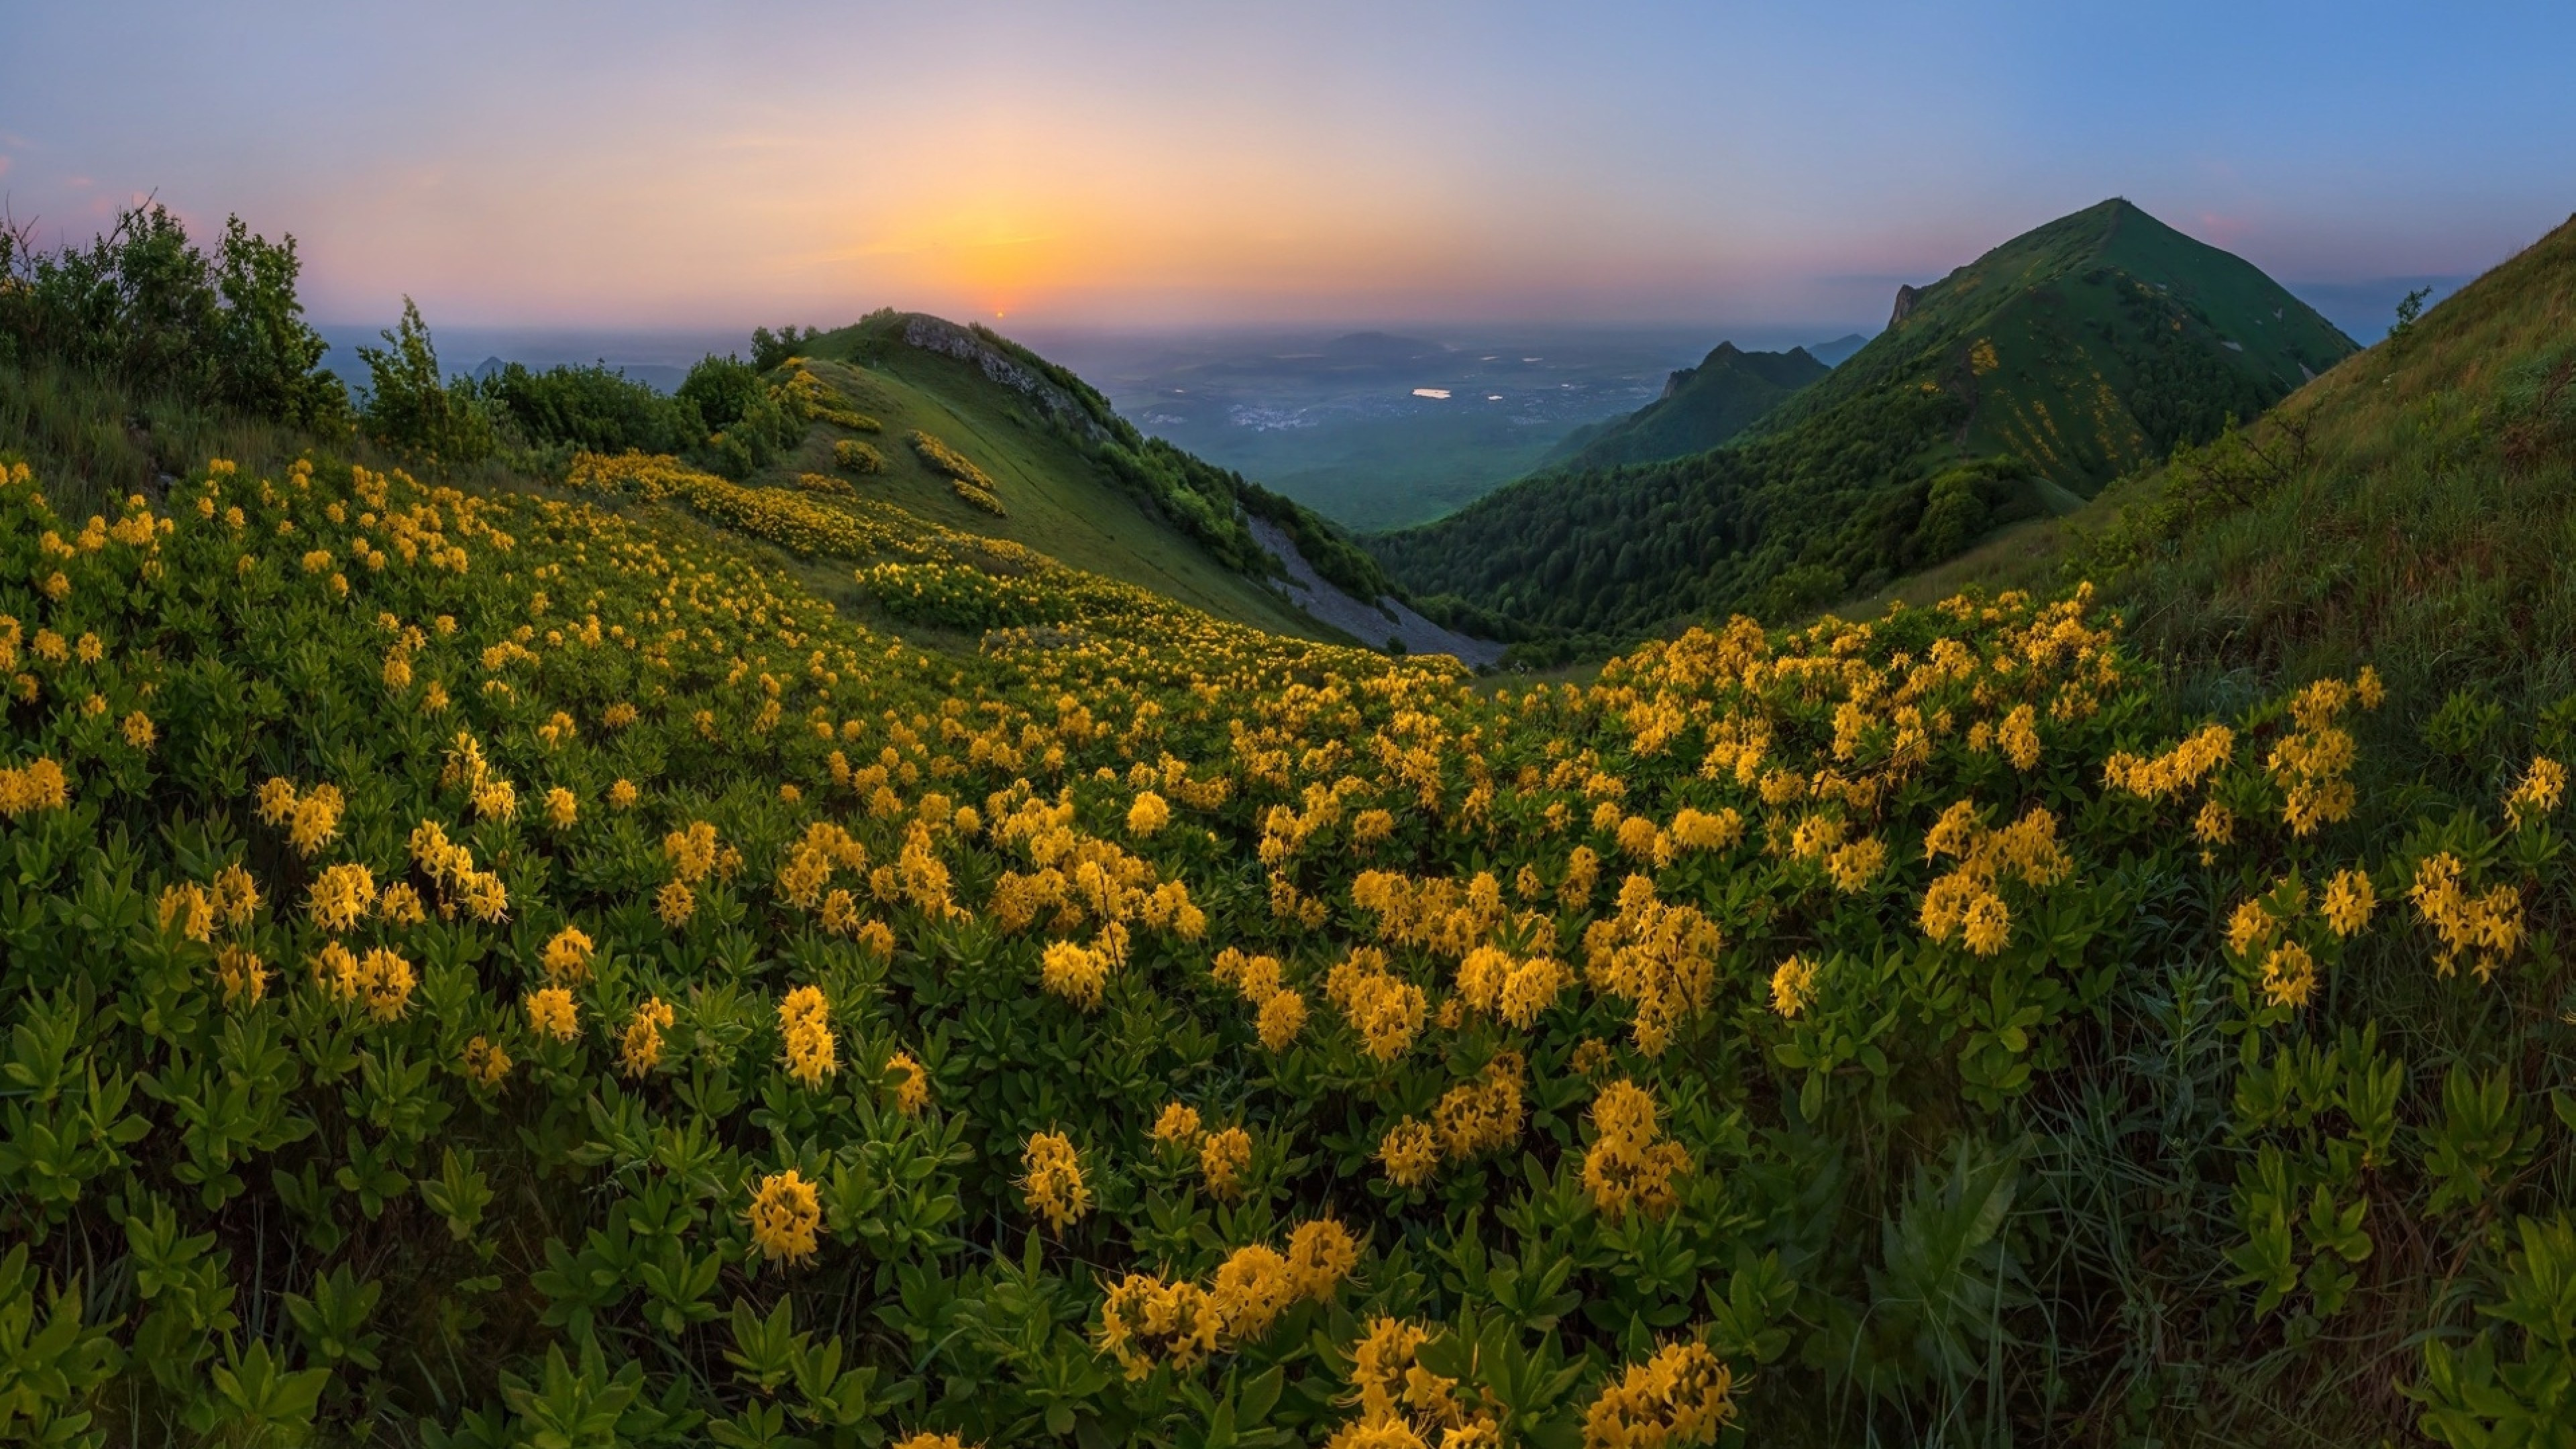 Download 3840x2160 Yellow Flowers, Field, Sunset, Hill, Mountain Wallpaper for UHD TV